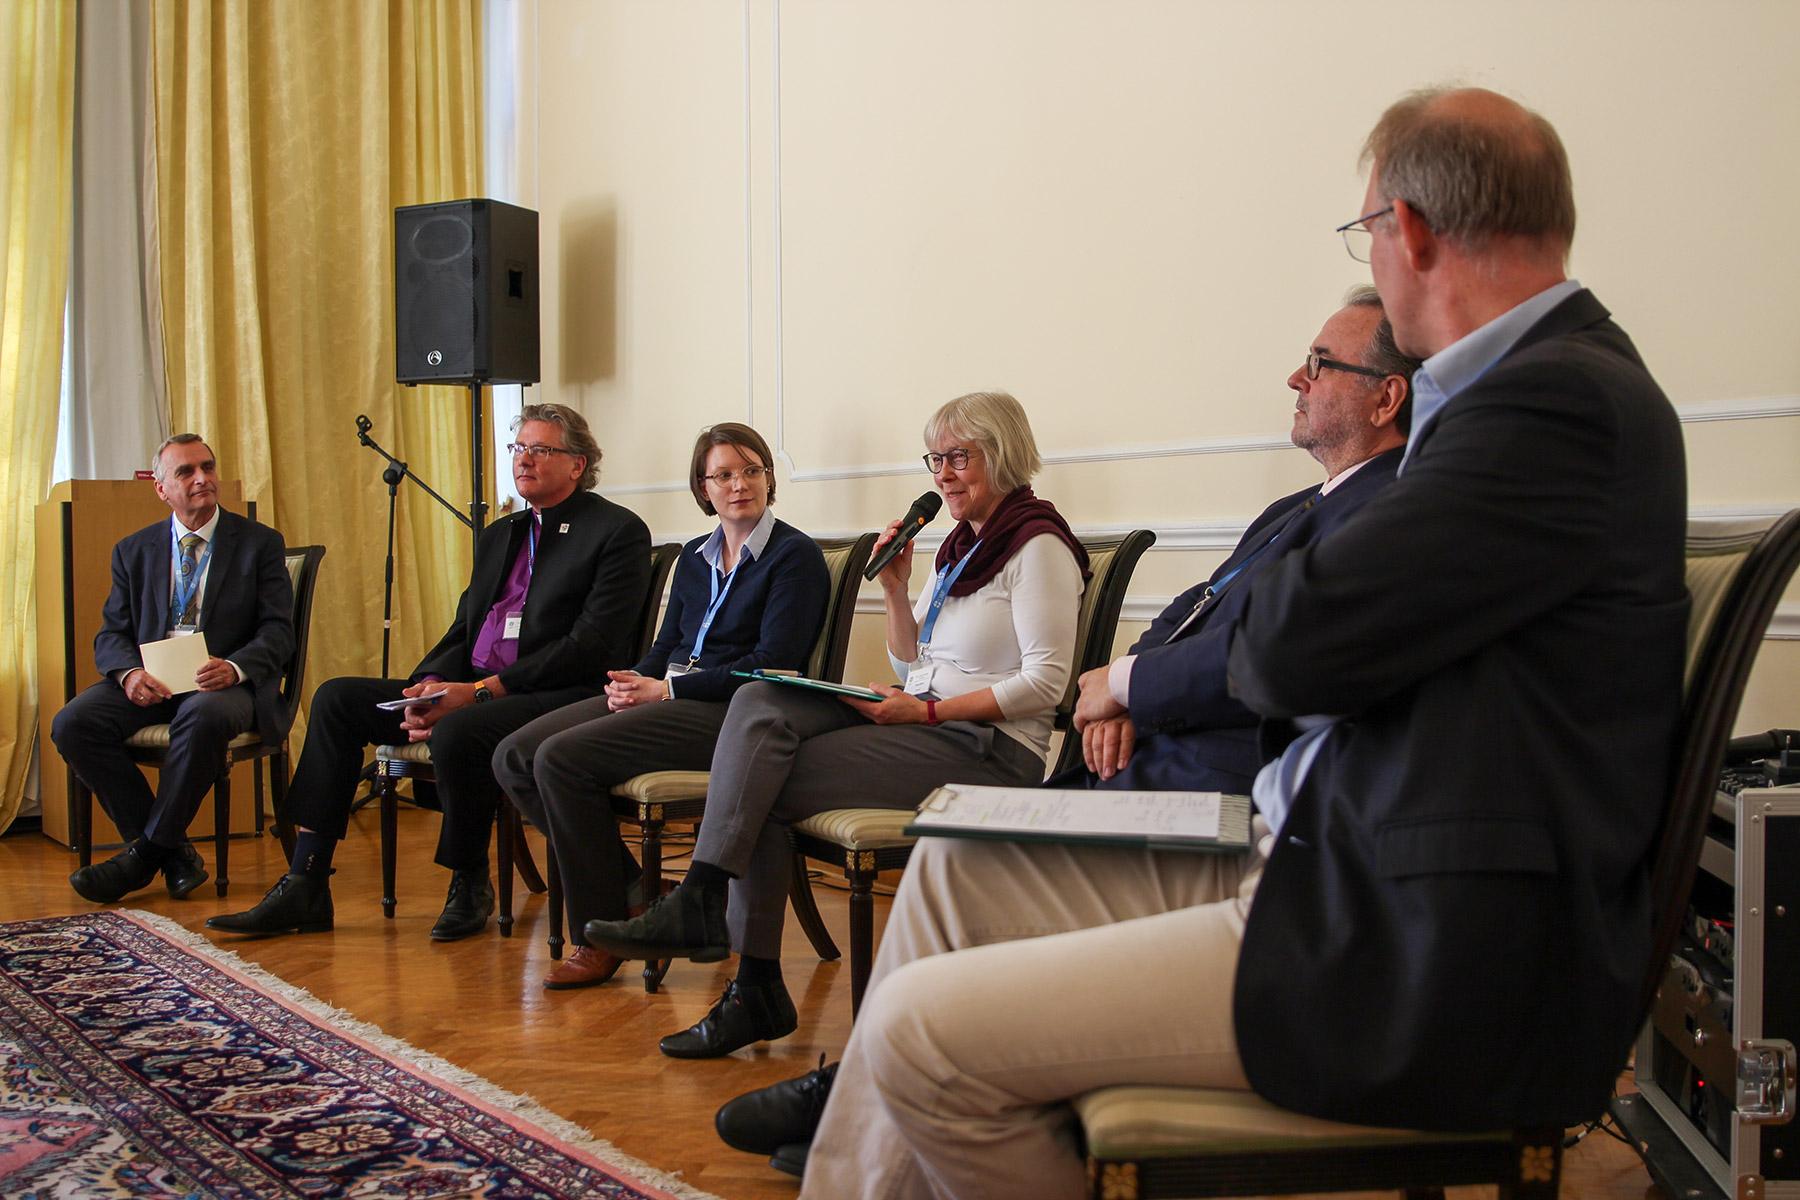 Panel on the situation of minority churches in the Central and Western Europe region. (From left) Michael Martin (moderator), Andreas Wöhle (Protestant Church in the Netherlands), Anna Krauss (Lutheran Council of Great Britain), Renate Dienst (Federation of Evangelical-Lutheran Churches in Switzerland and in the Principality of Liechtenstein), Michael Chalupka (Evangelical Church of the Augsburg Confession in Austria), and Ulrich Rüsen-Weinhold (United Protestant Church of France). Photo: LWF/A. Weyermüller